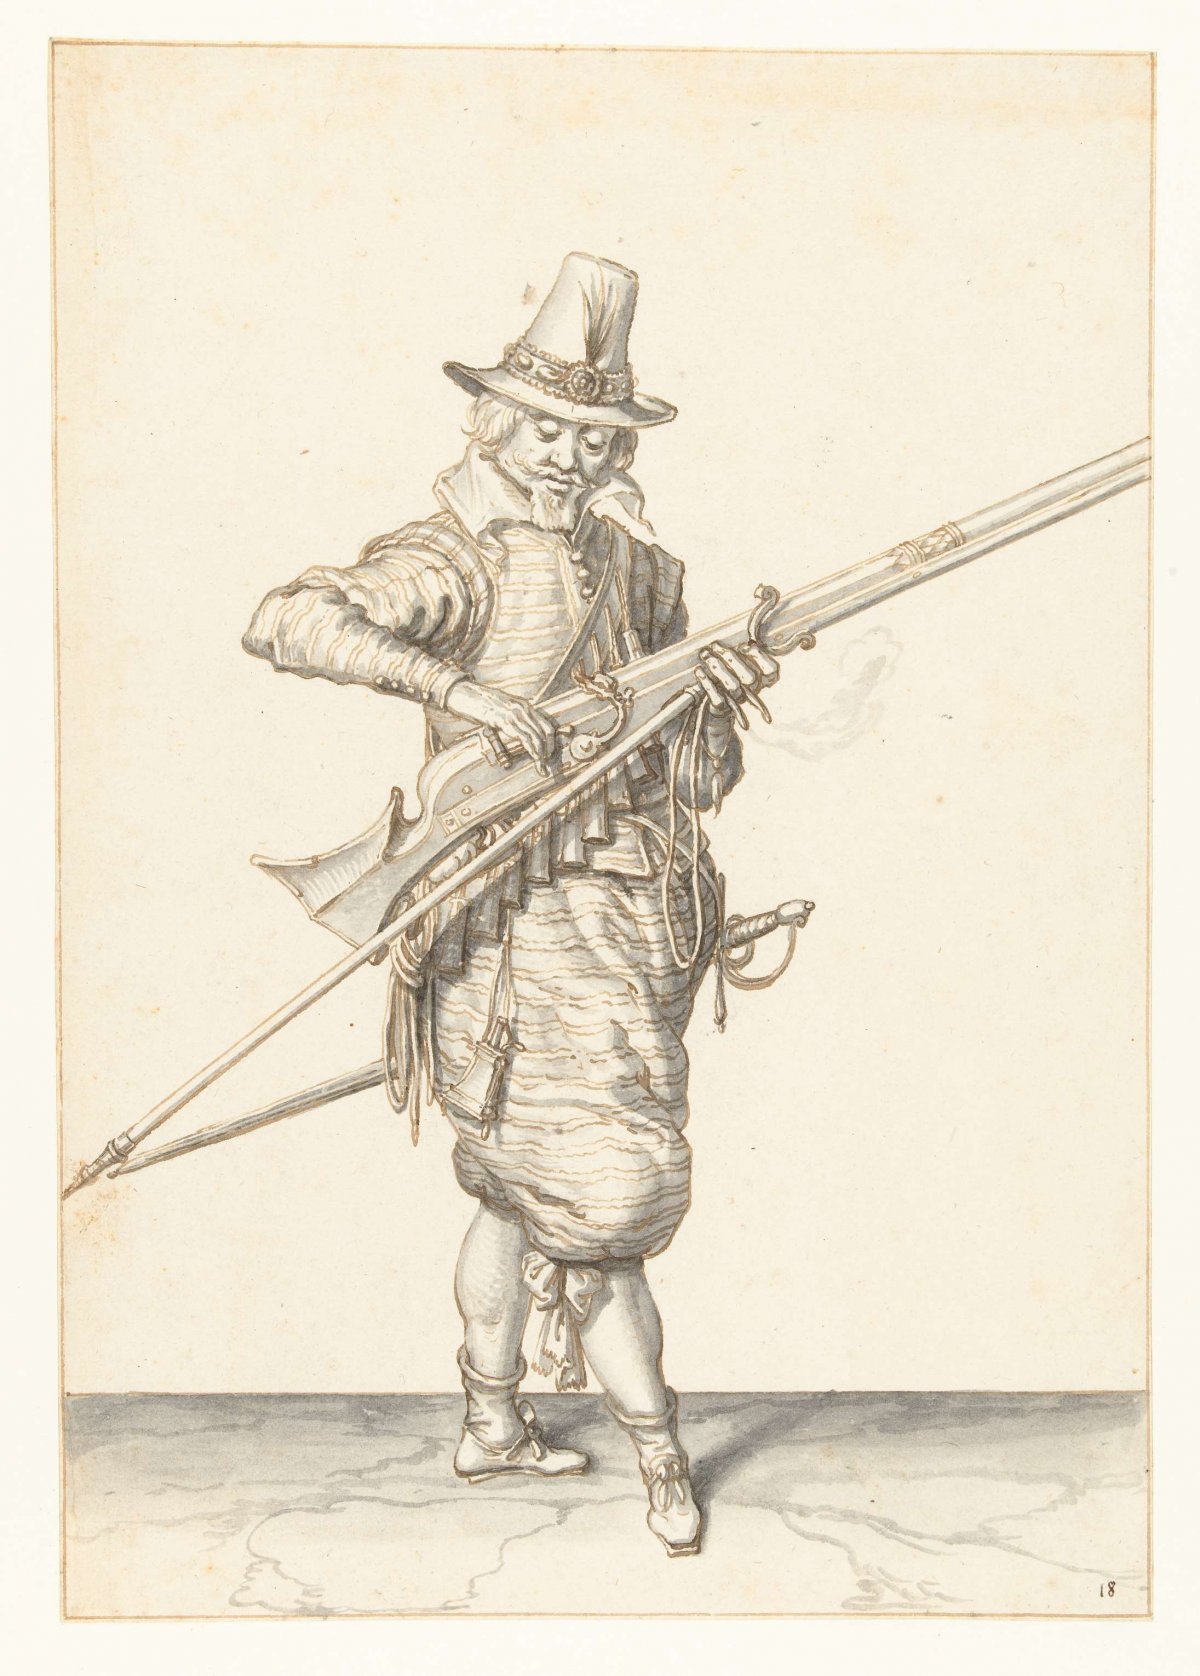 Soldier closing the pan of his musket, Jacques de Gheyn (II), 1596 - 1606